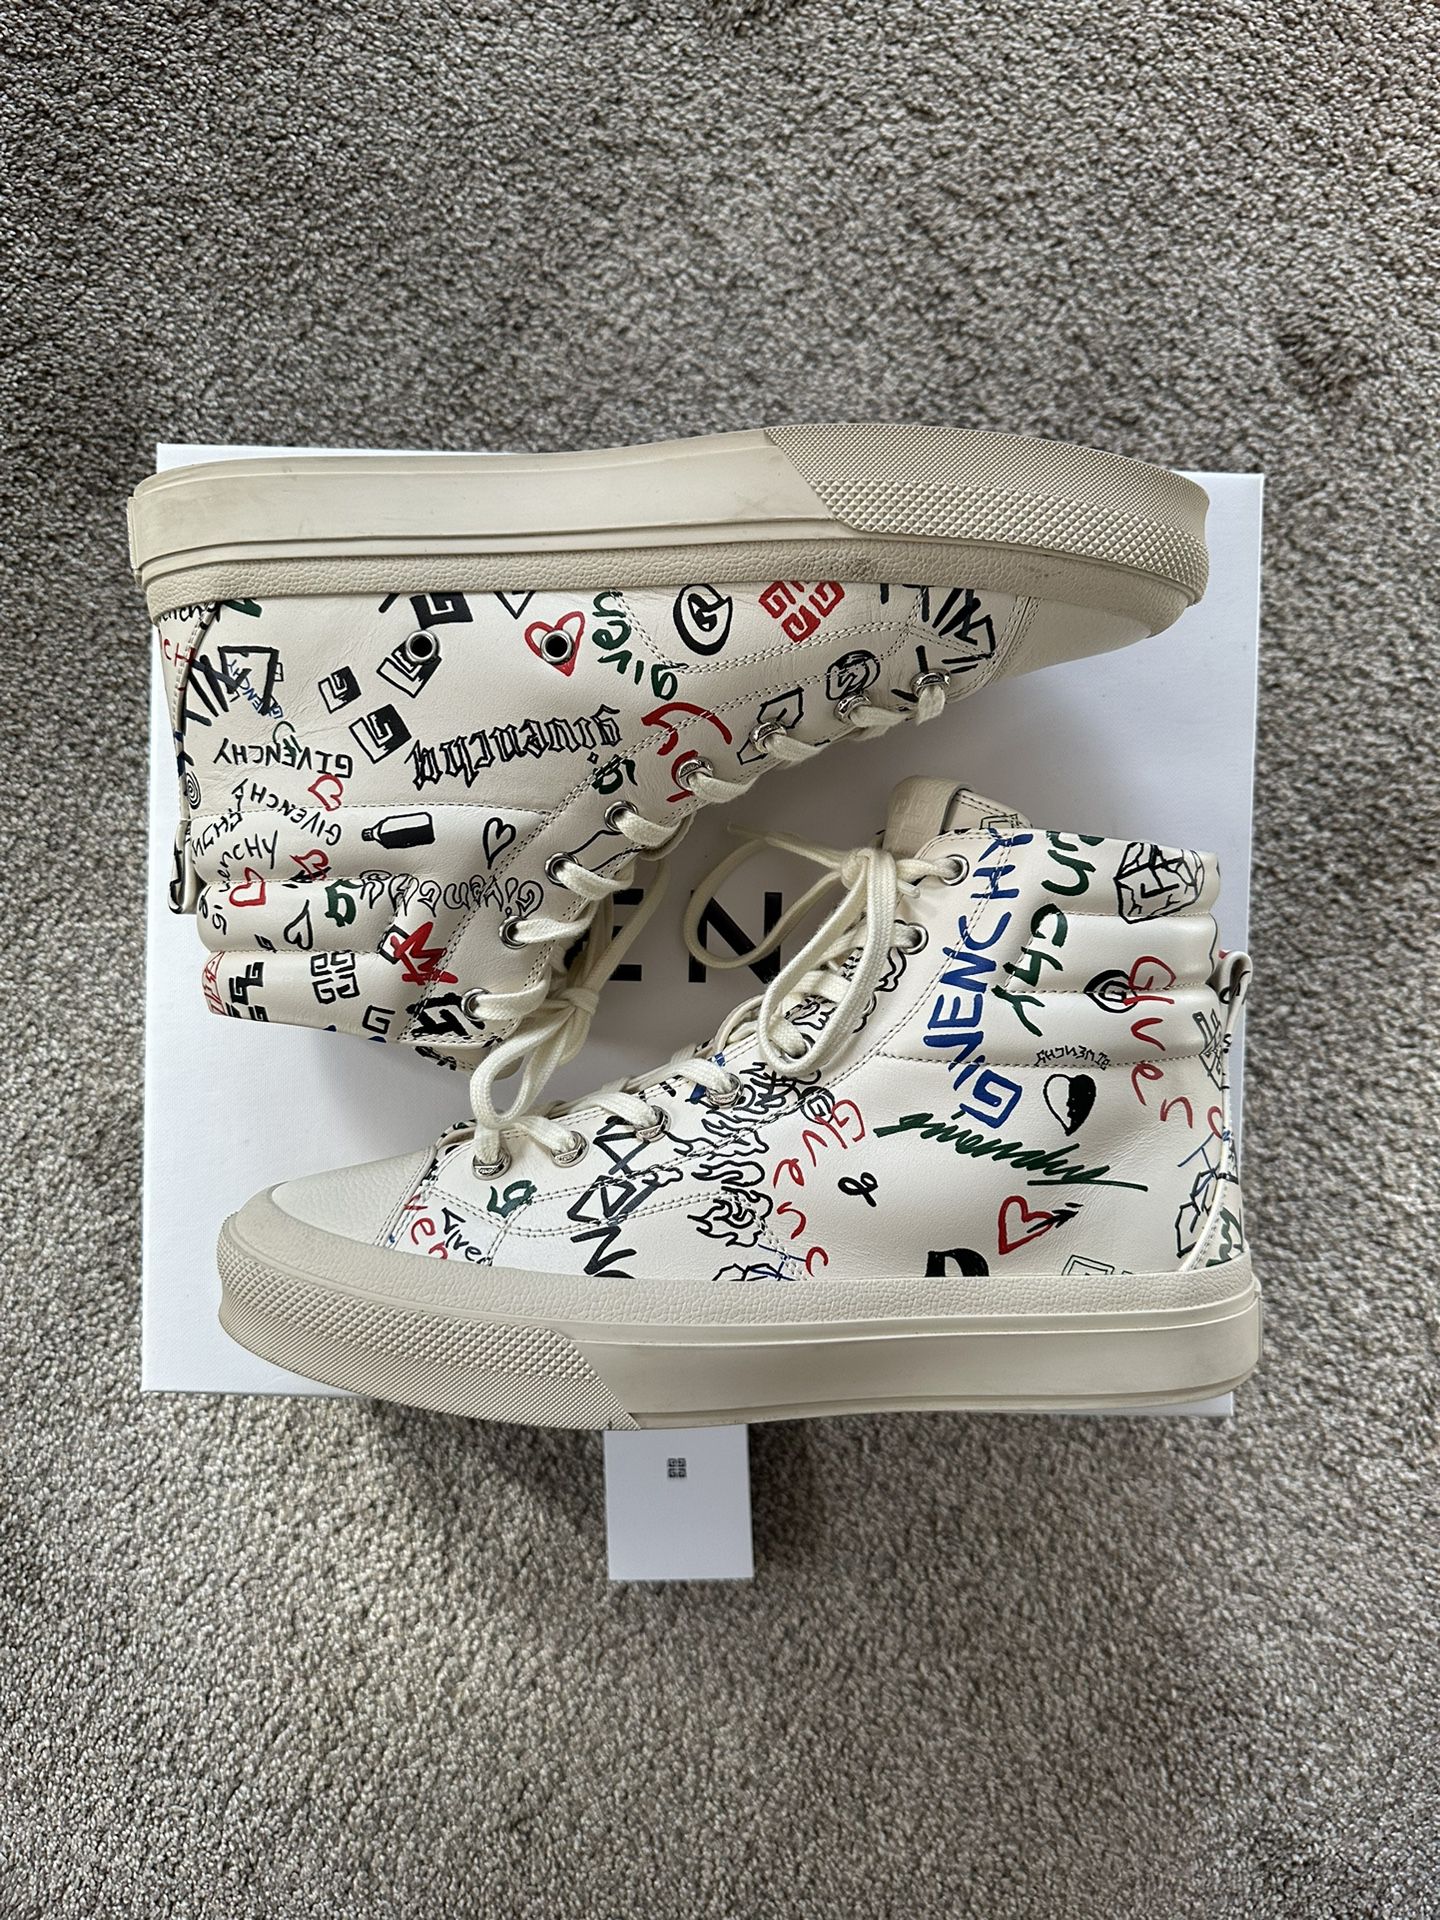 Givenchy City High Sneakers - Size 10